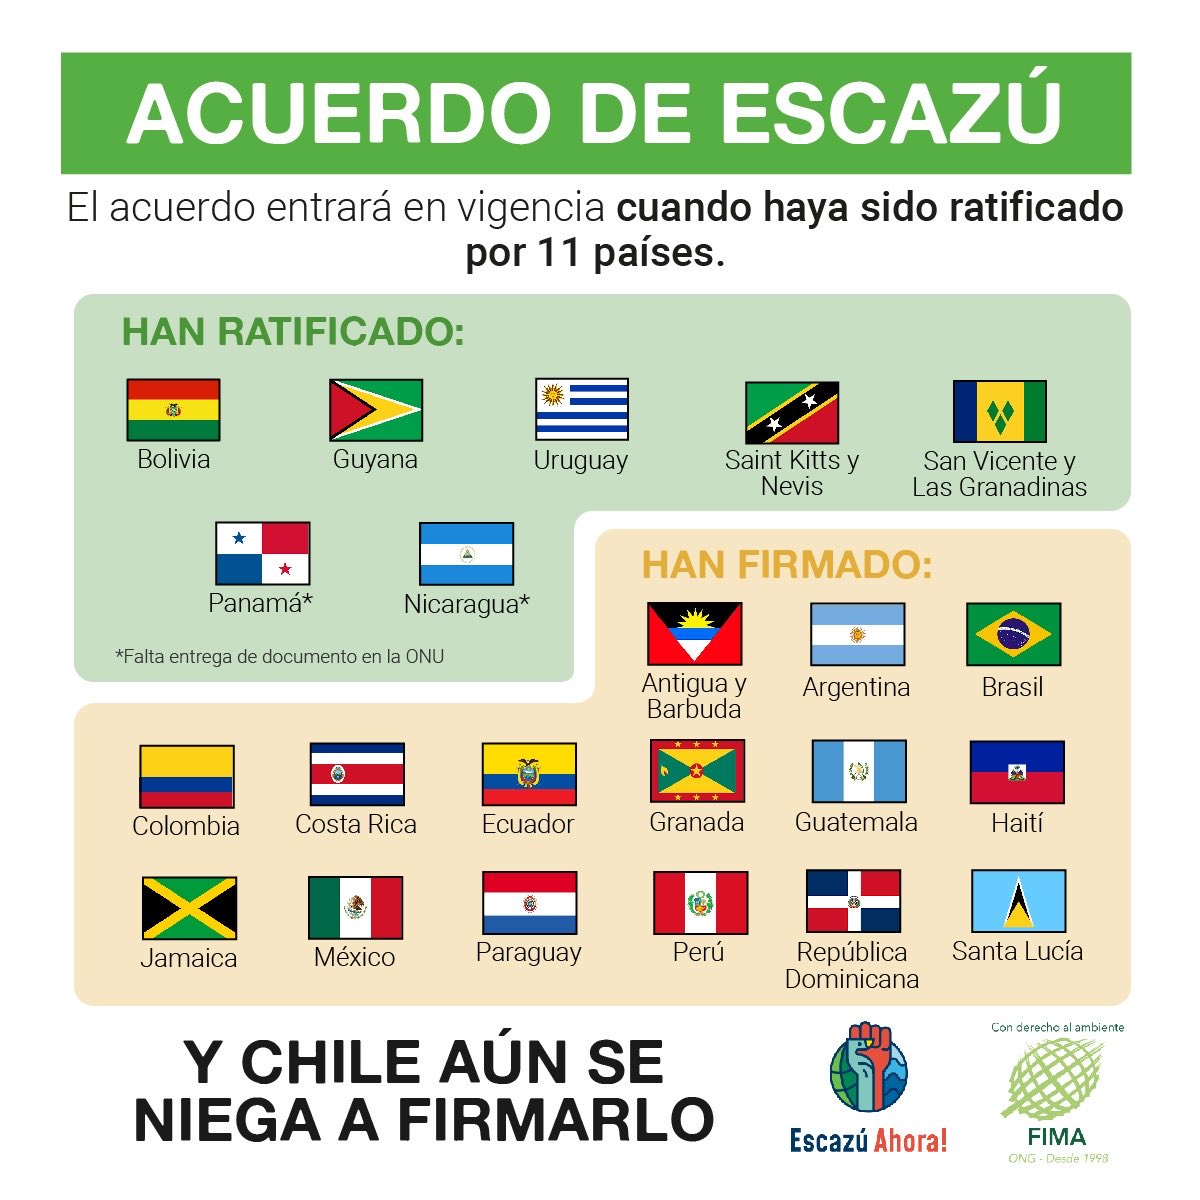 Where is Chile ? Why will they not sign the Escazu Agreement for Latin America and the Caribbean on environmental rights ? ..#Escazuahora #environmentaljustice #environmentaldemocracy #sign4environment #Escazuagreement #environment @FIMA_Chile